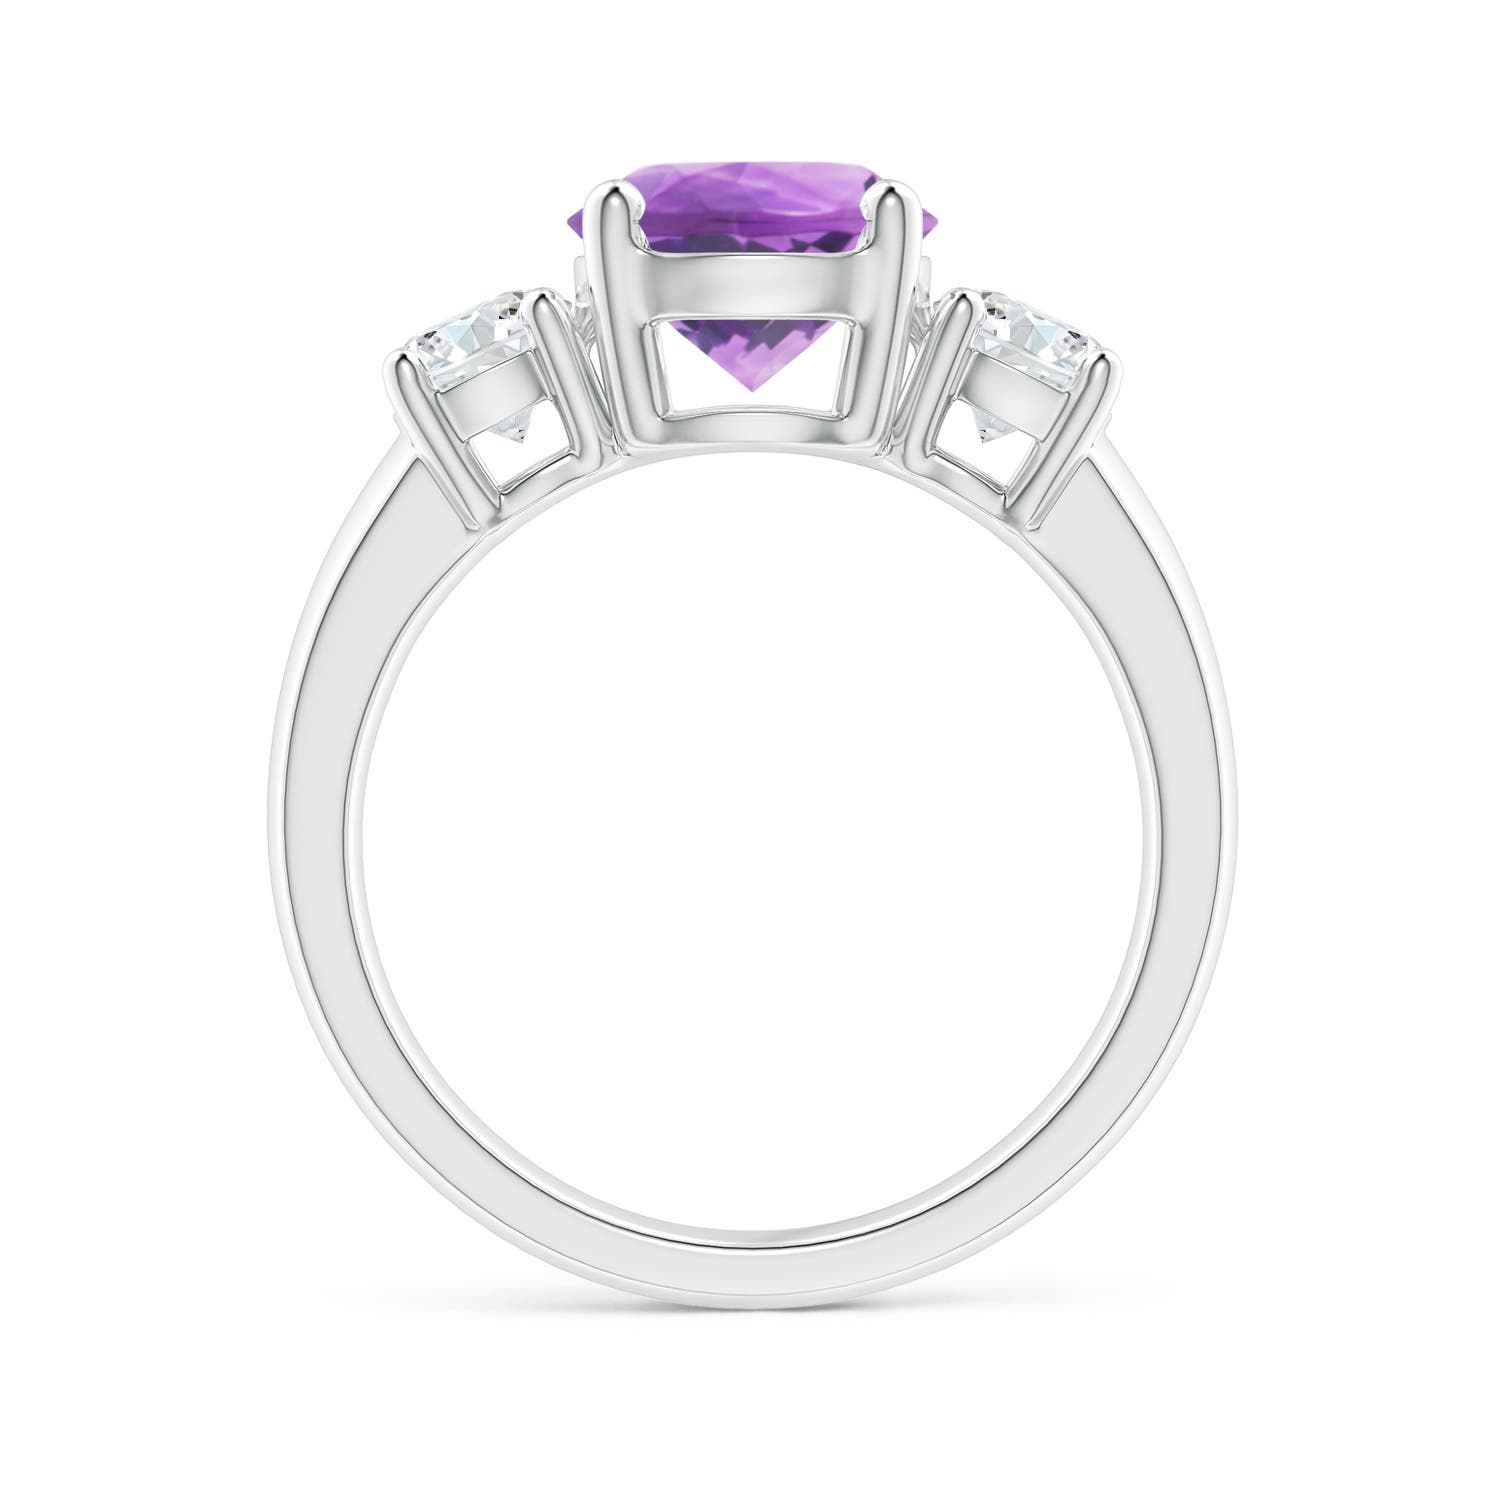 A - Amethyst / 2.4 CT / 14 KT White Gold